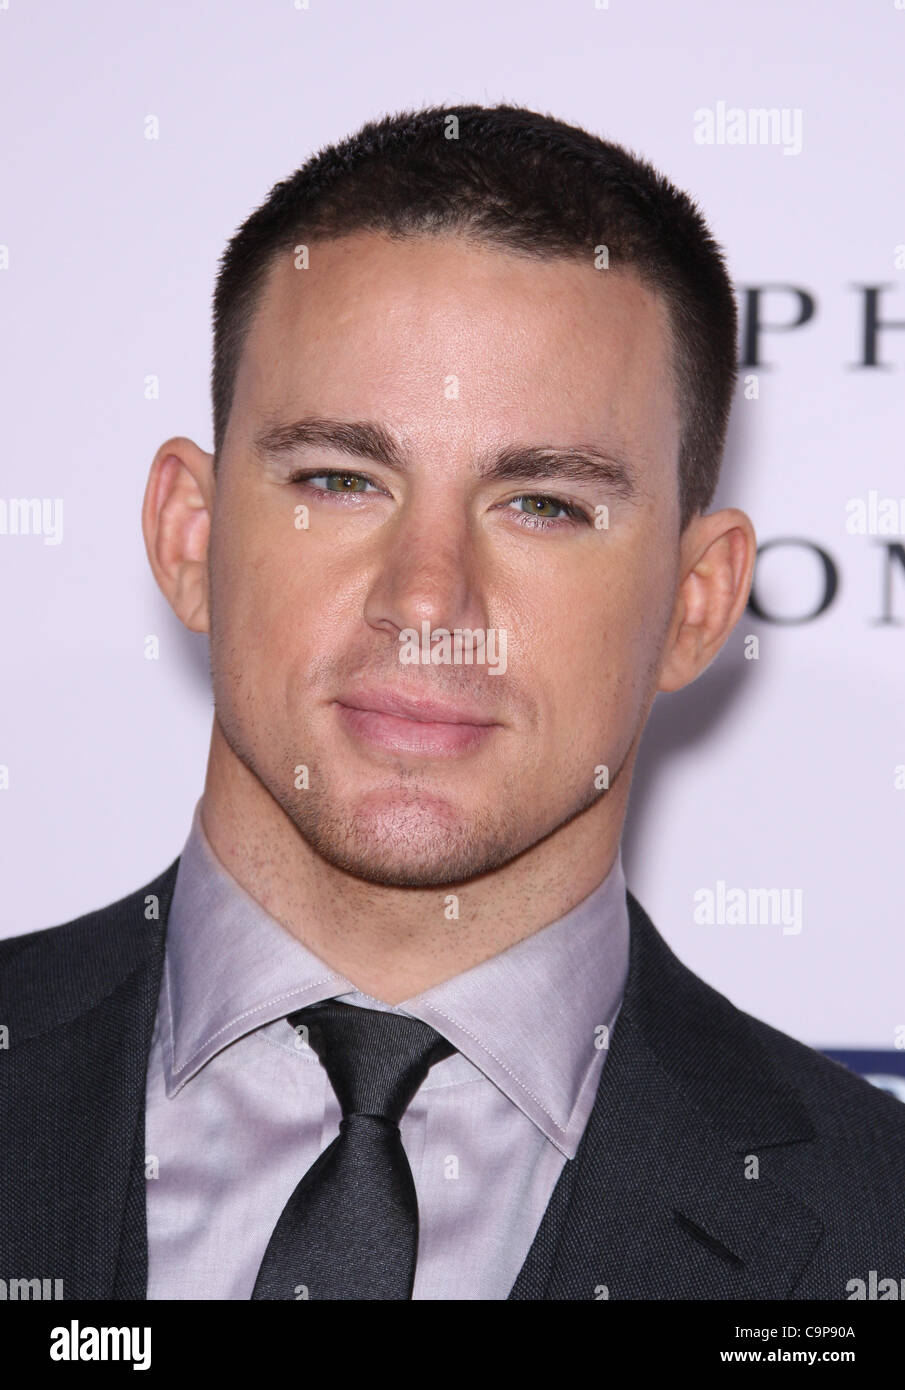 CHANNING TATUM THE VOW. WORLD PREMIERE HOLLYWOOD LOS ANGELES CALIFORNIA USA 06 February 2012 Stock Photo